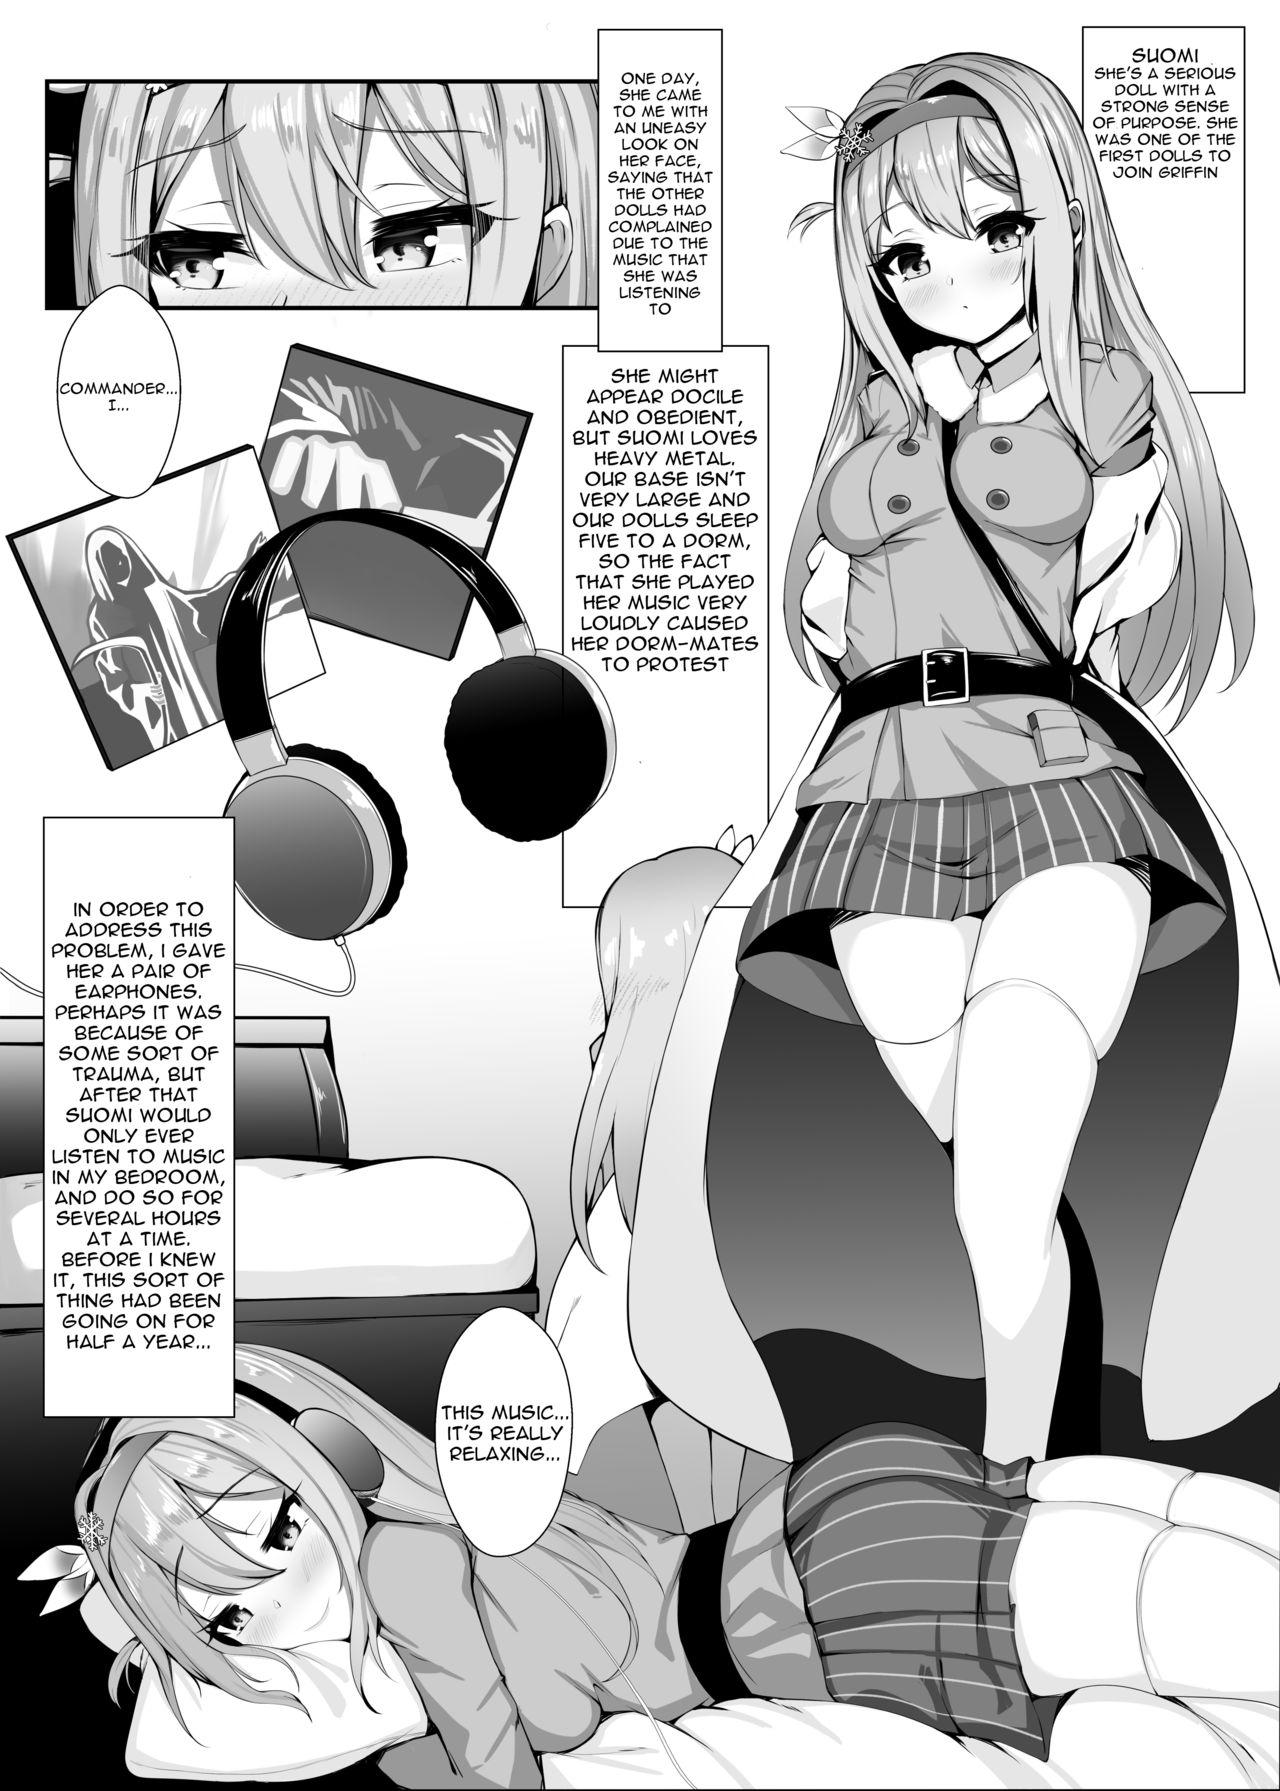 Bathroom Suomi - Mission of Love - Girls frontline Bound - Page 4